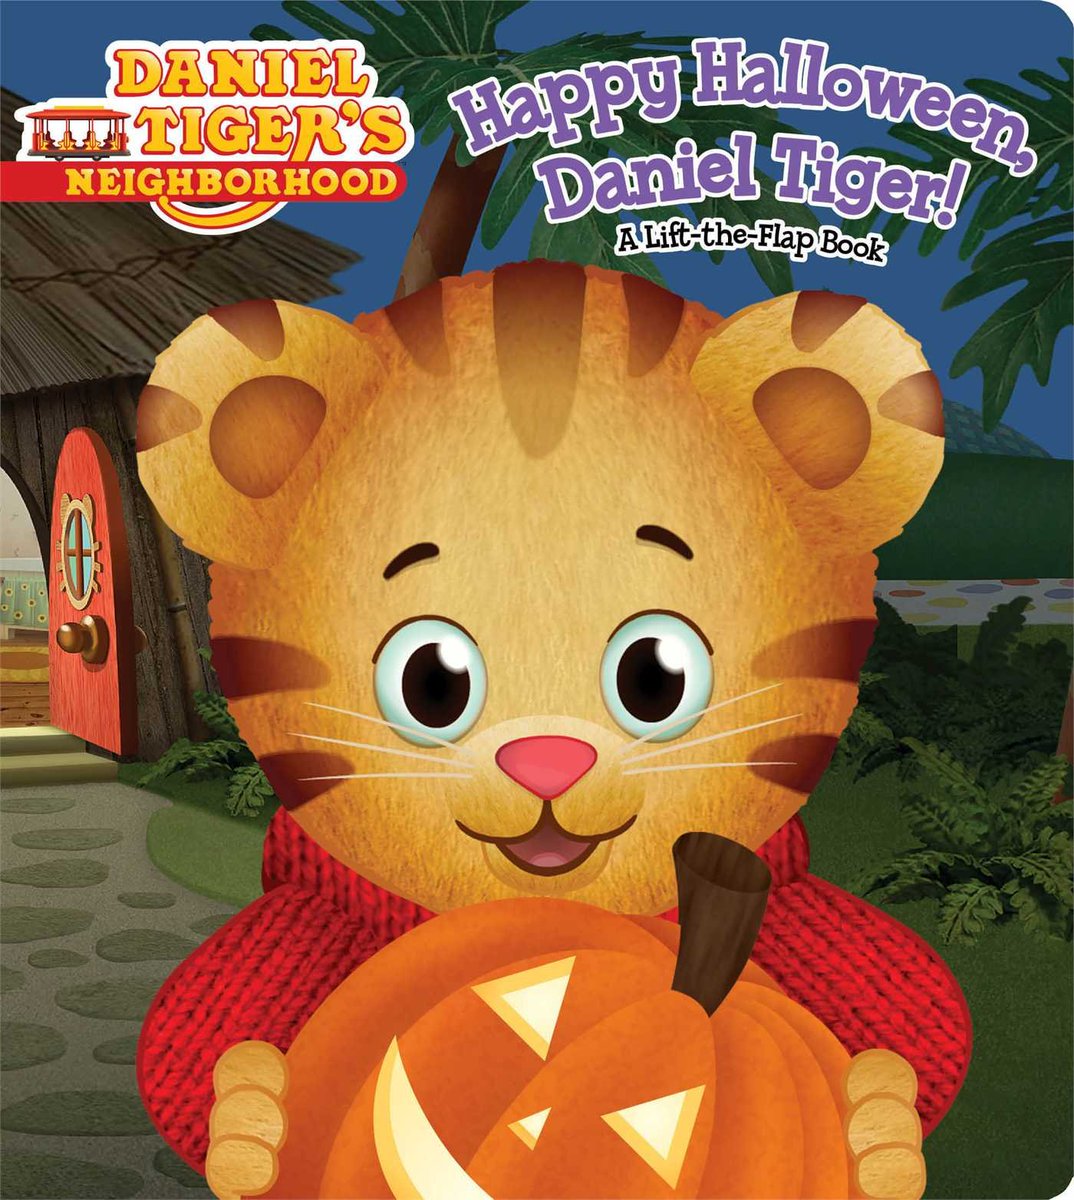 Get ready to celebrate Halloween with Daniel! Check out “Happy Halloween, Daniel Tiger” wherever you buy books.